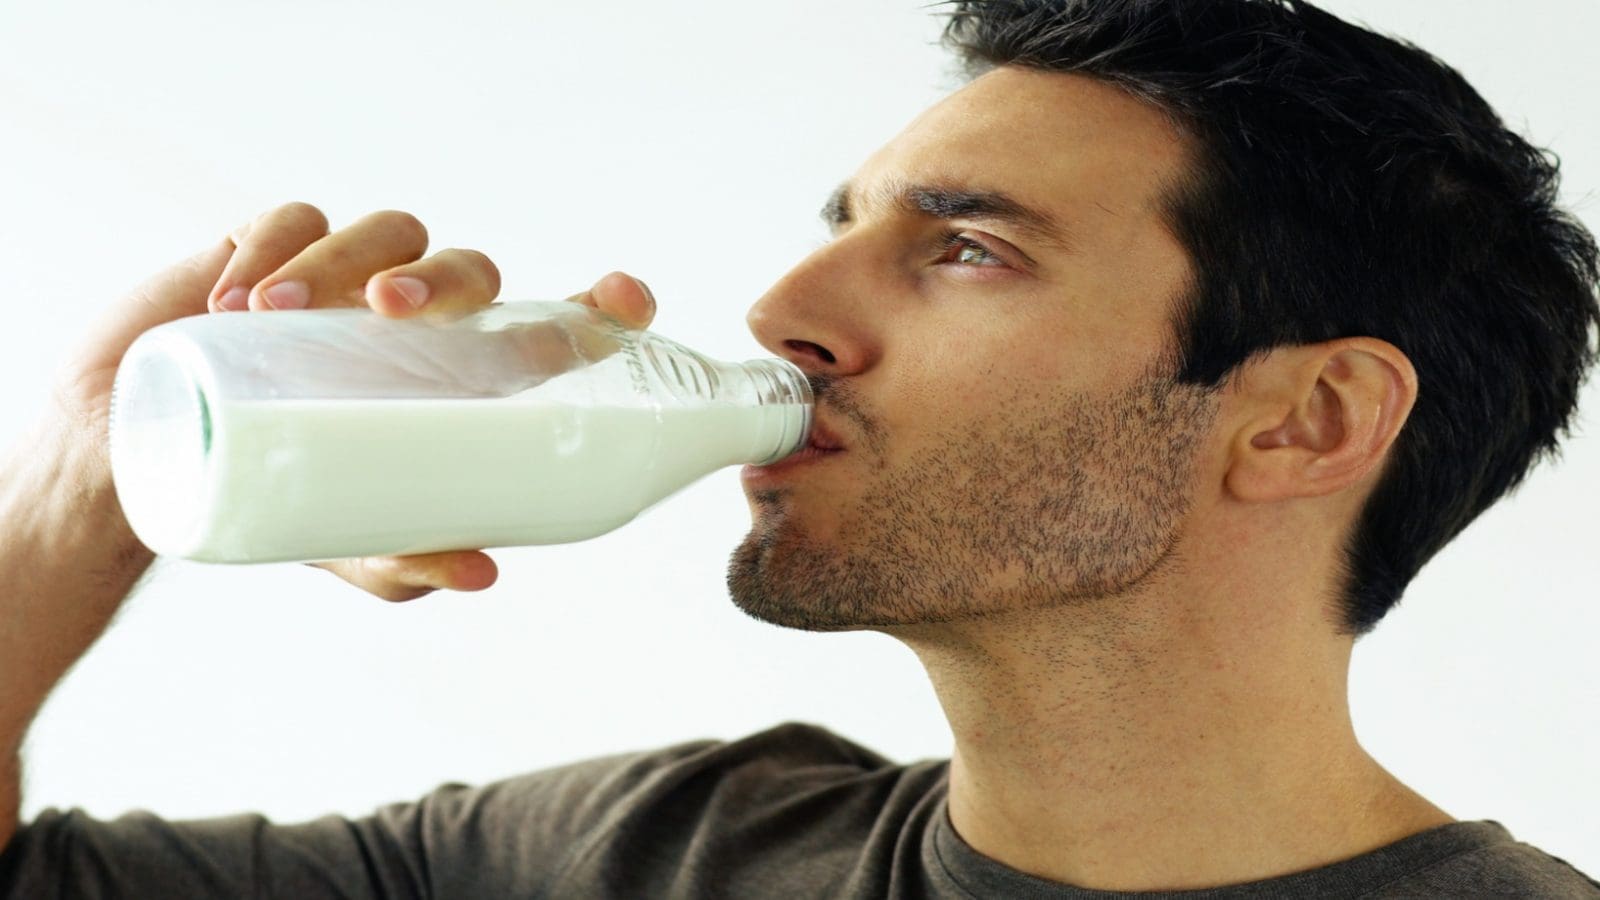 Younger Europeans consuming more dairy now than 3 years ago, new study finds